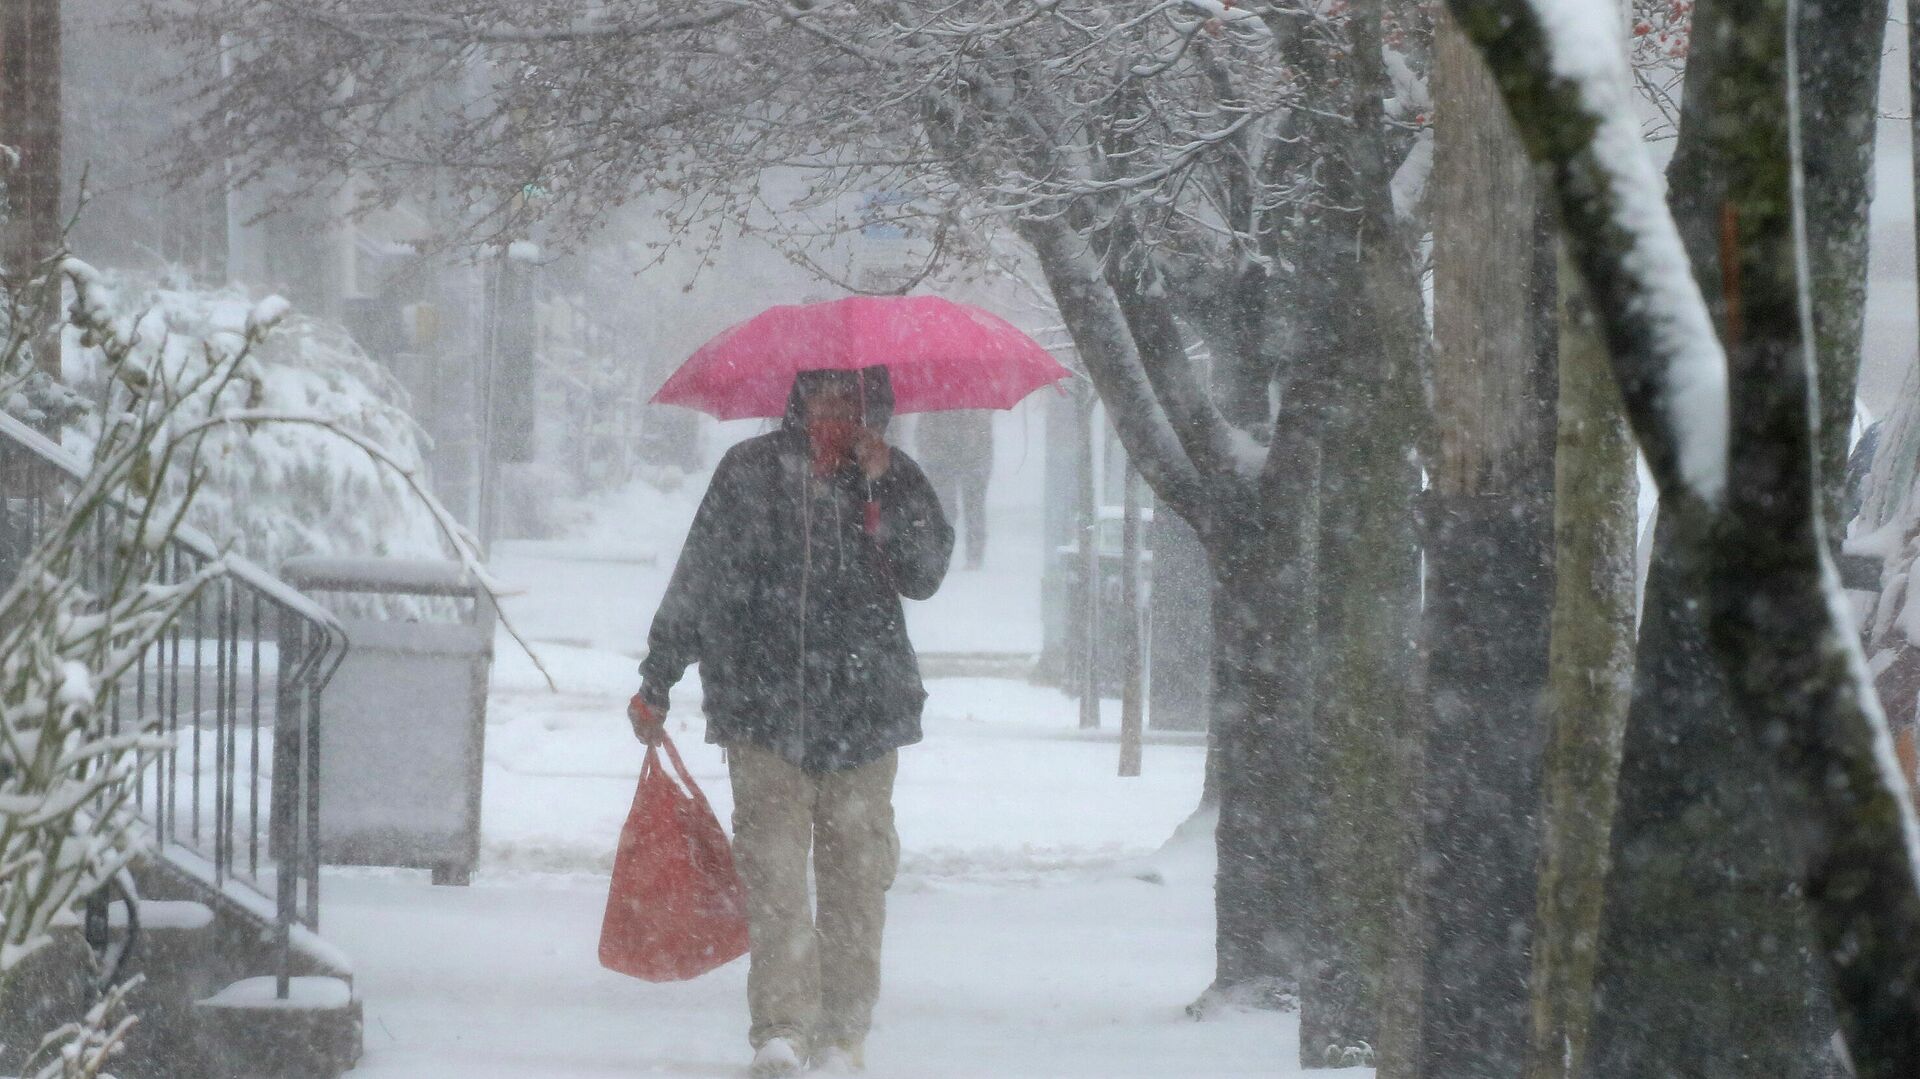 A man walks through Lancaster City, Pa., with his shopping bag during a snowstorm Saturday, March 12, 2022.  - Sputnik International, 1920, 12.03.2022